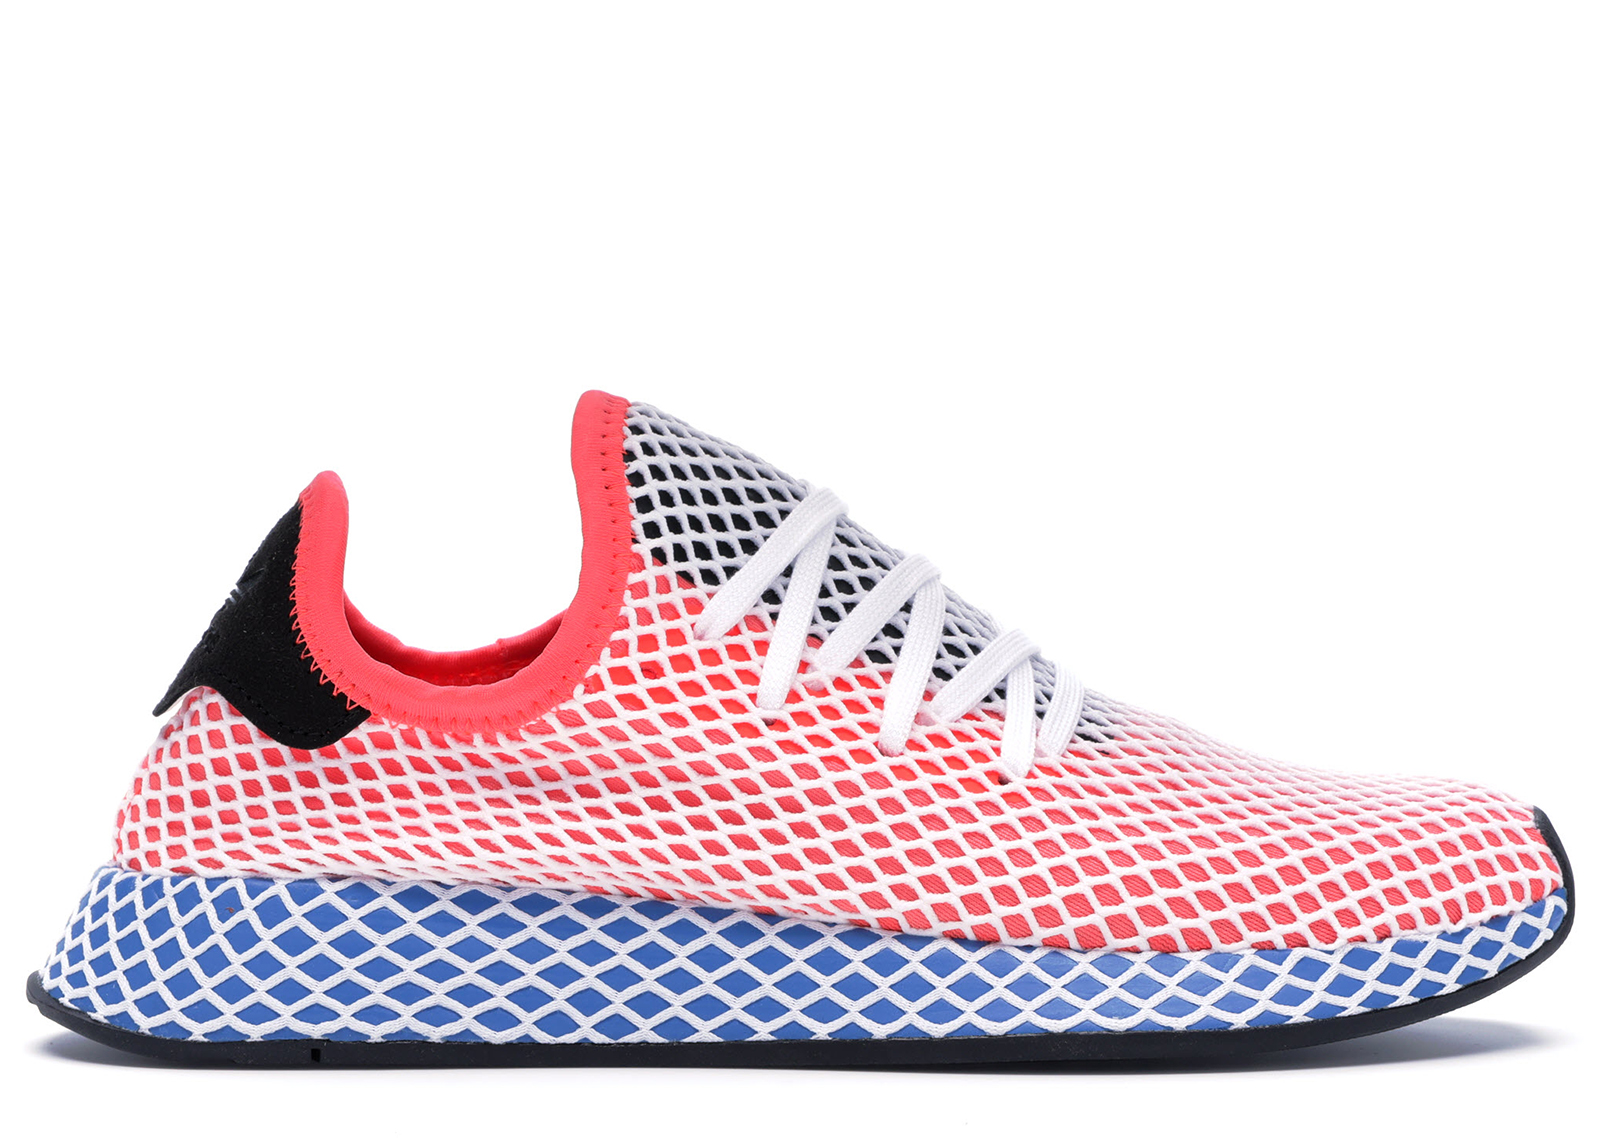 adidas deerupt blue and red